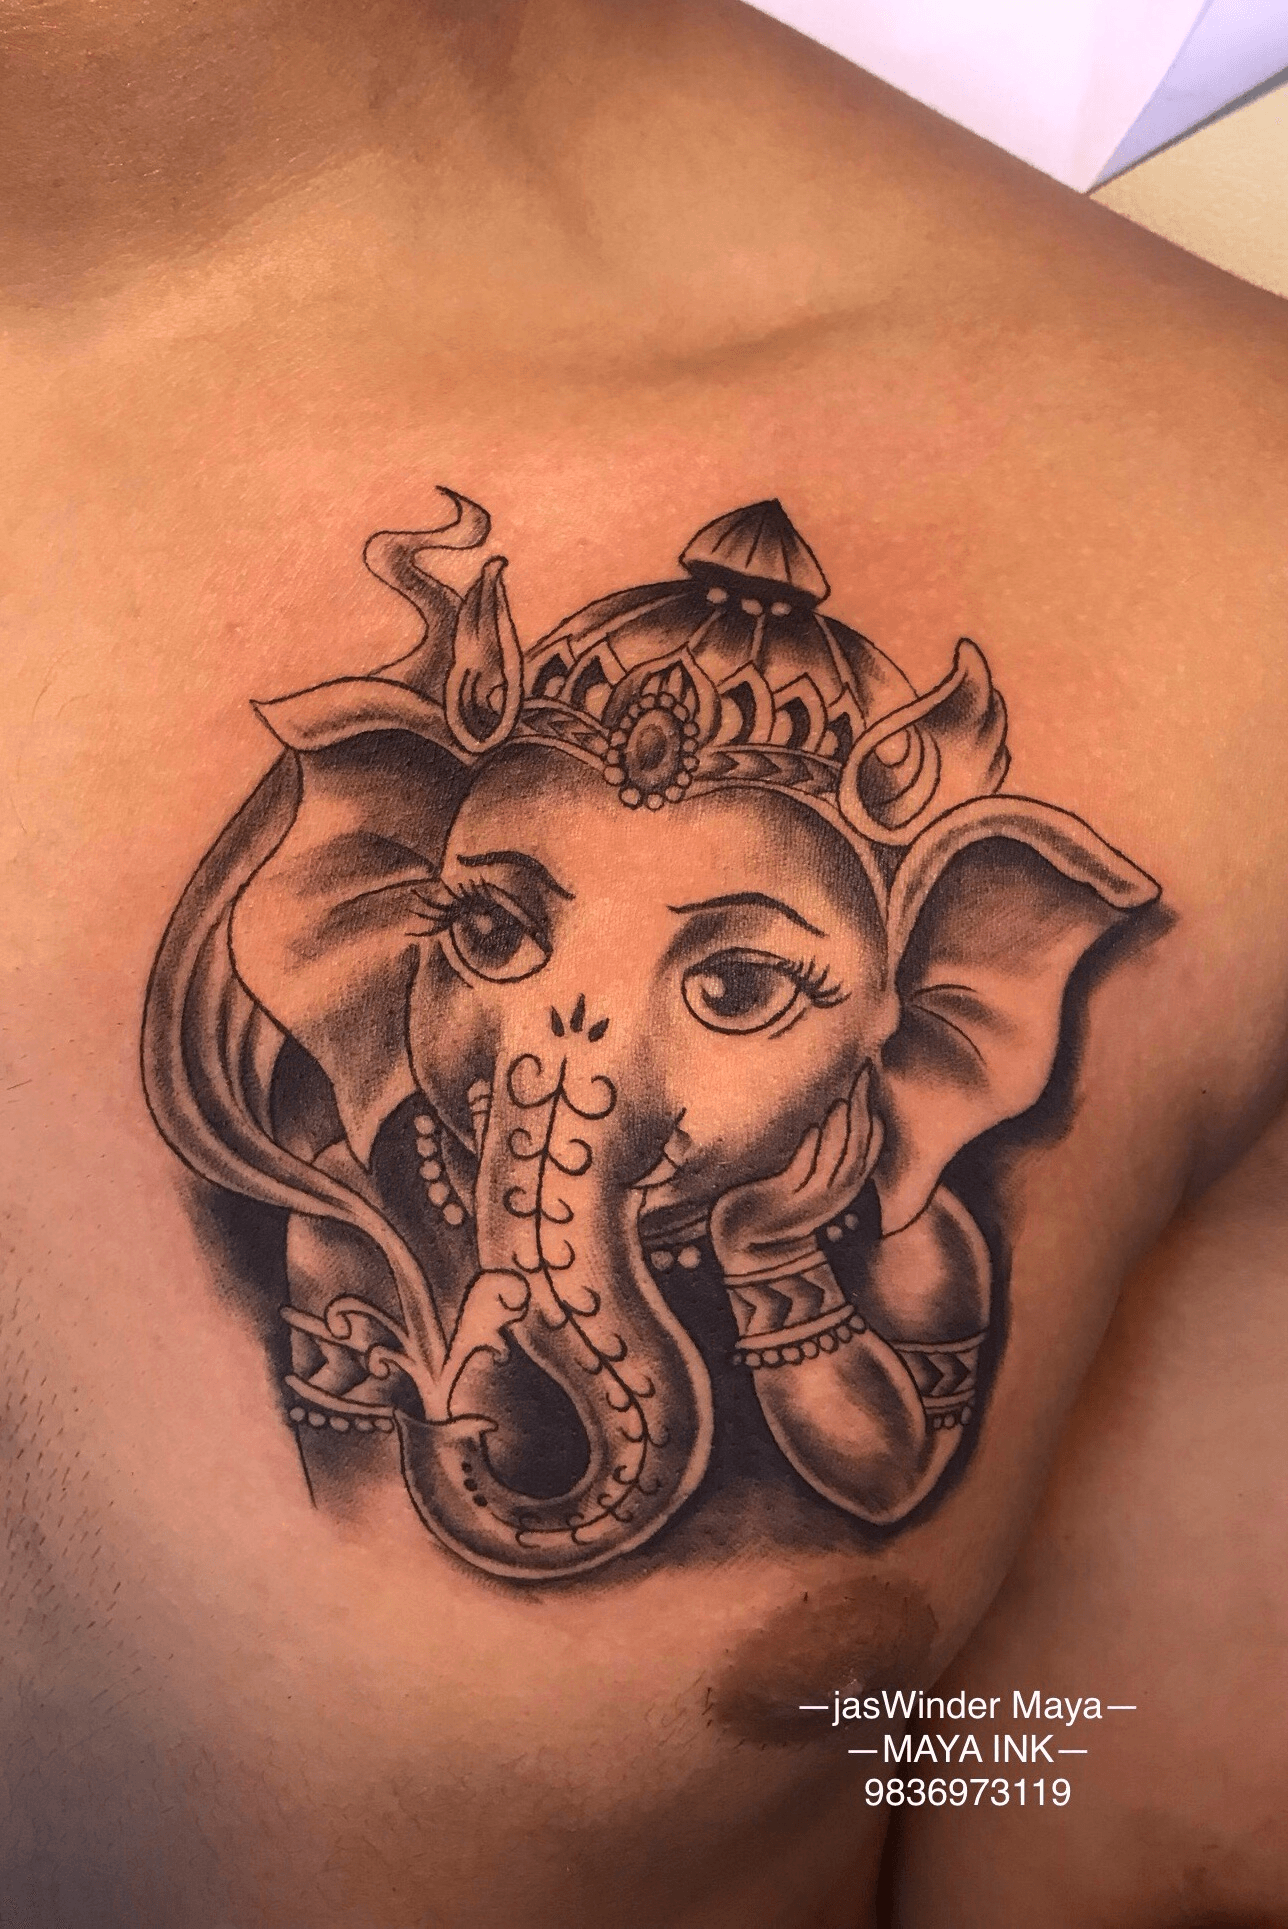 Ganesha Tattoo ❤️ meaning, photos, sketches and examples